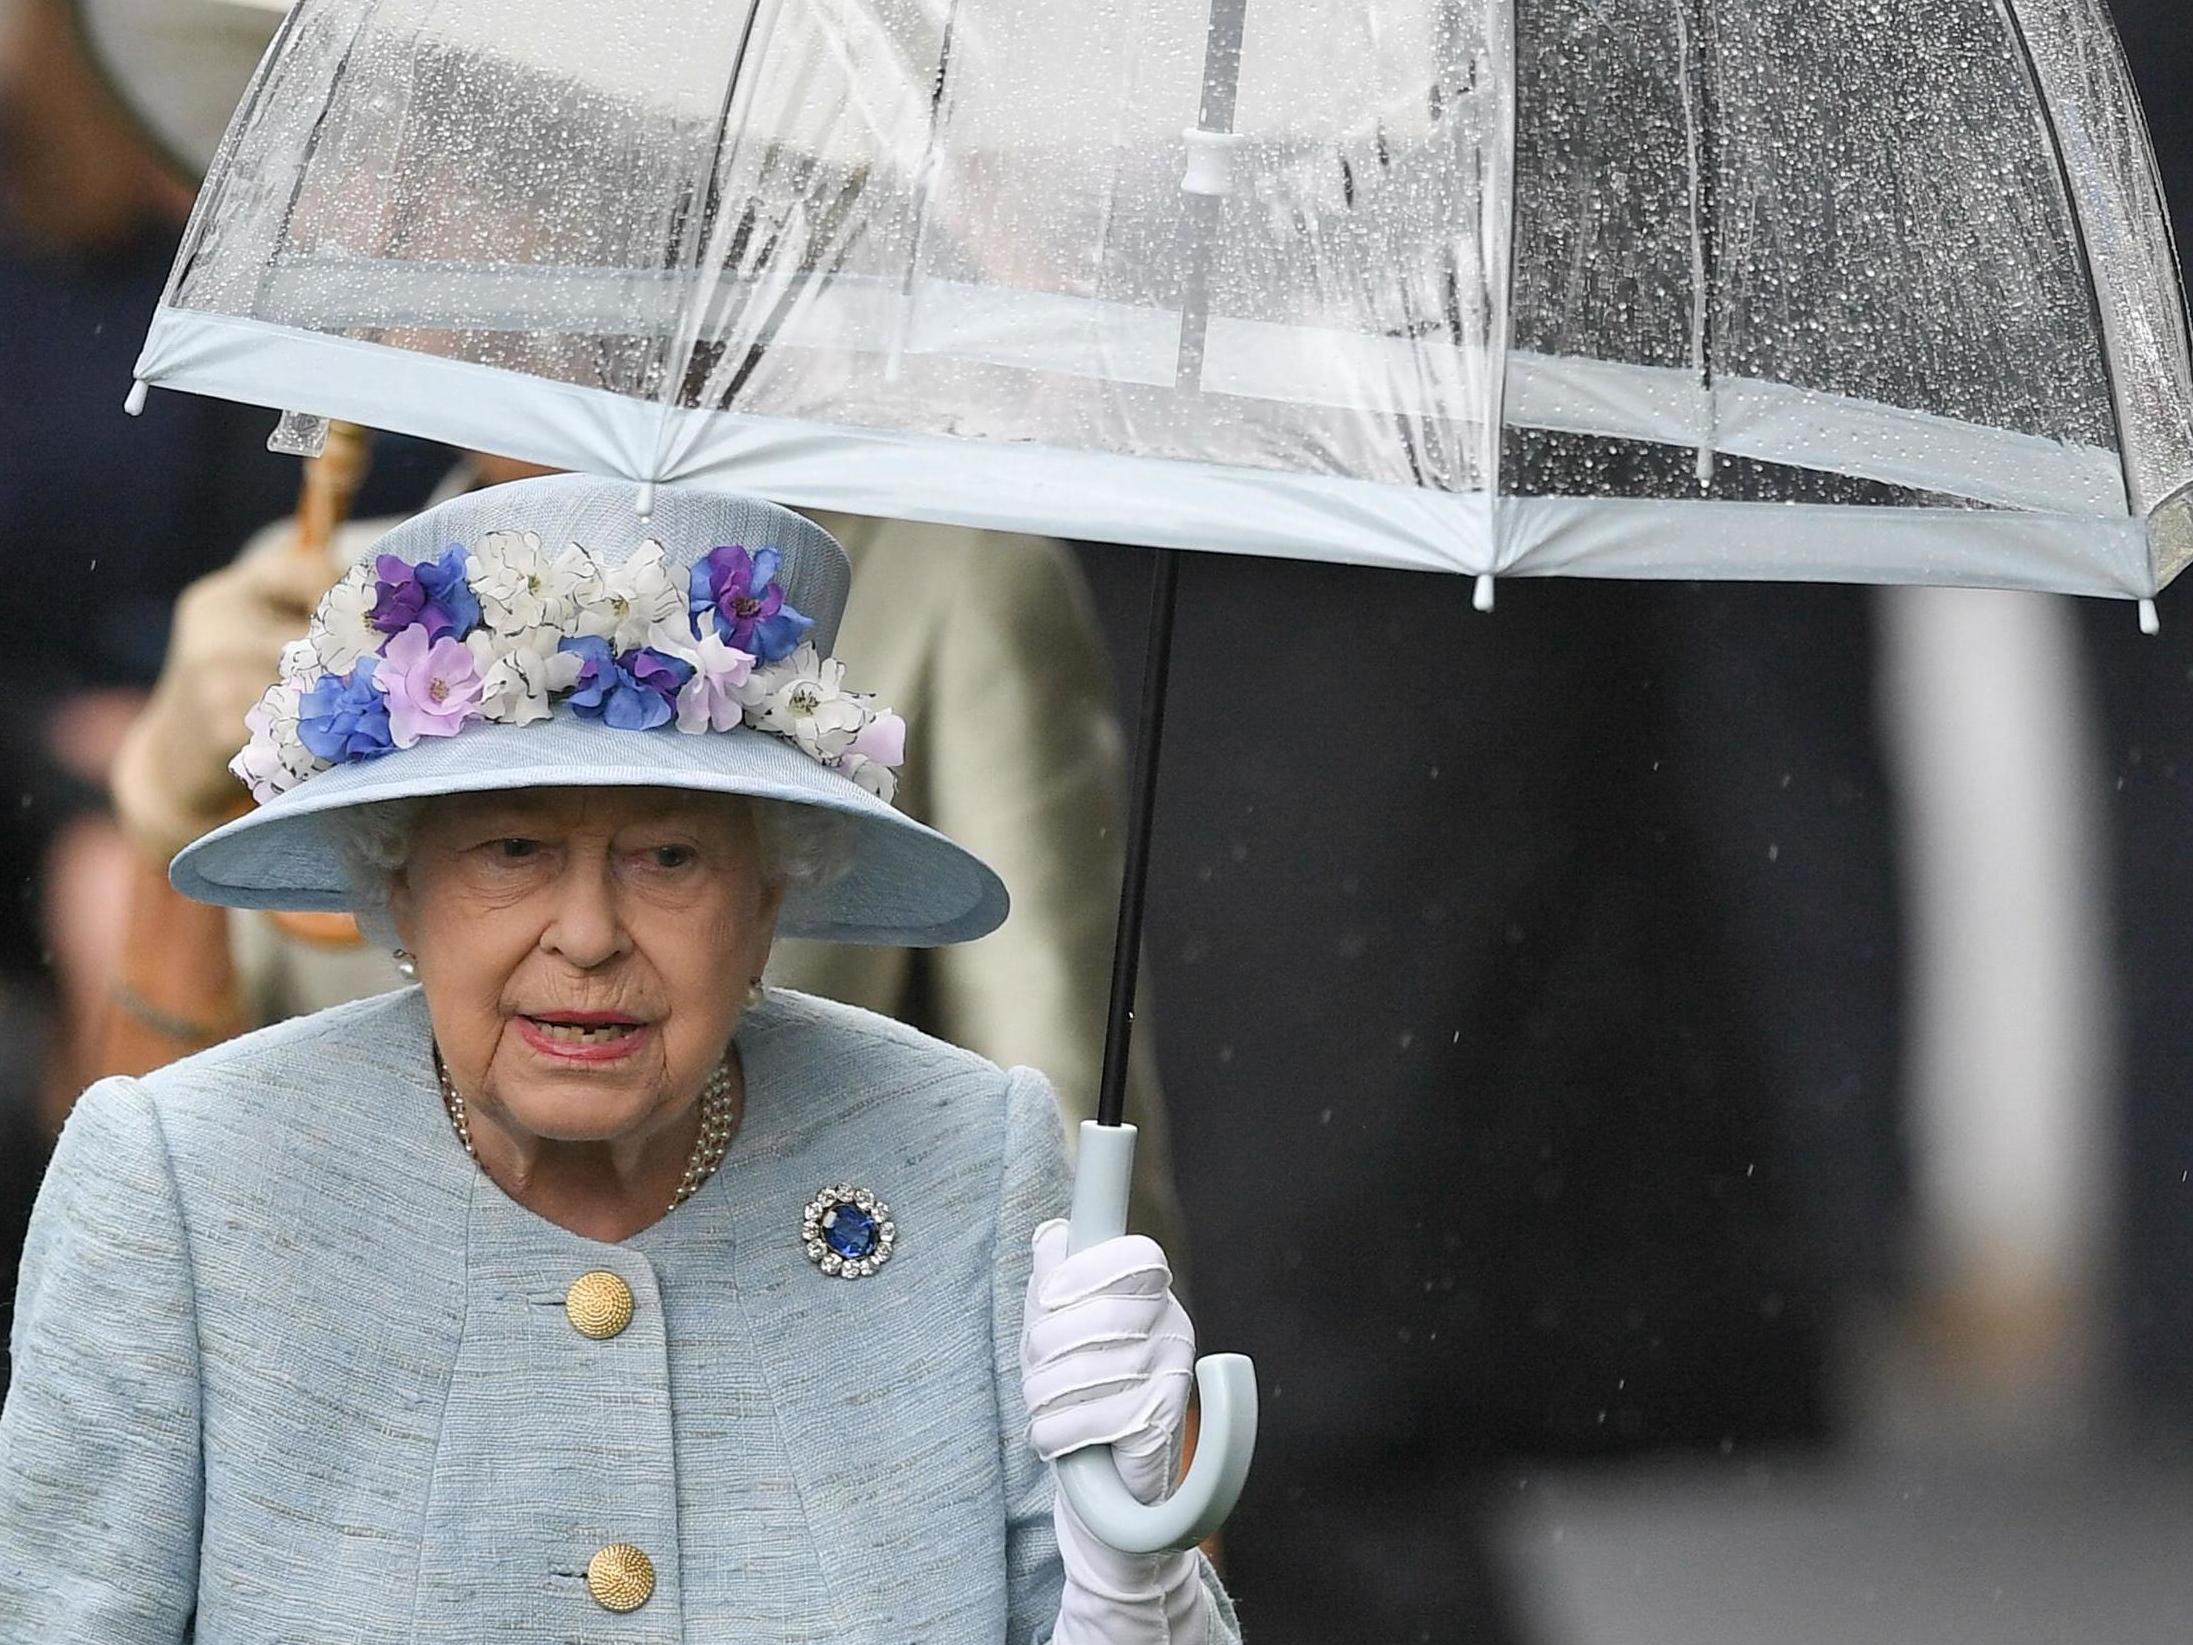 The second day of Royal Ascot was hit by heavy rain